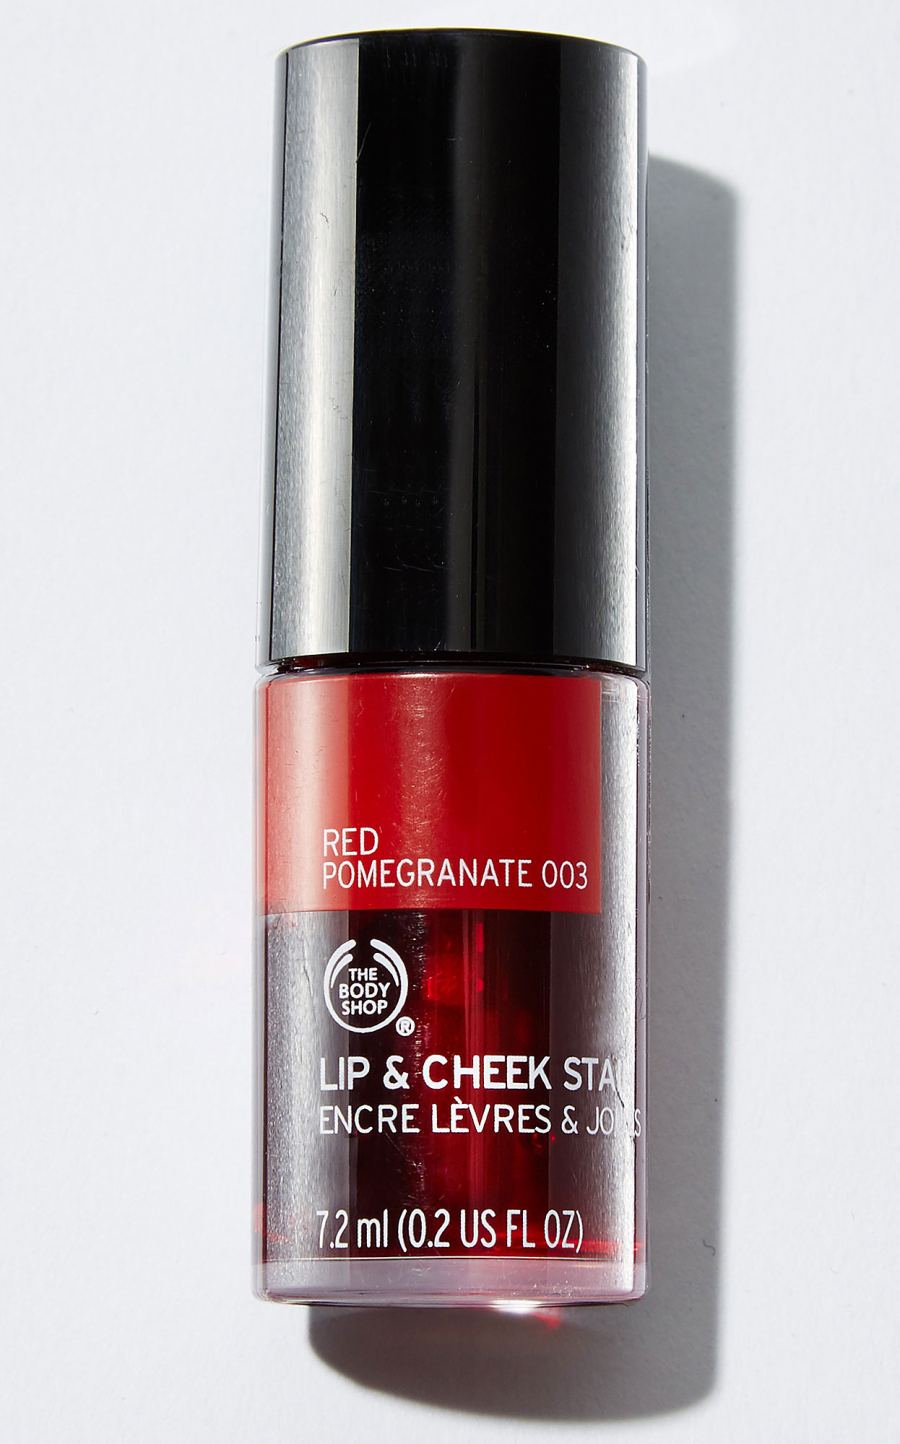 the-body-shop-lip-Cheek-Stain-red-pomegranate